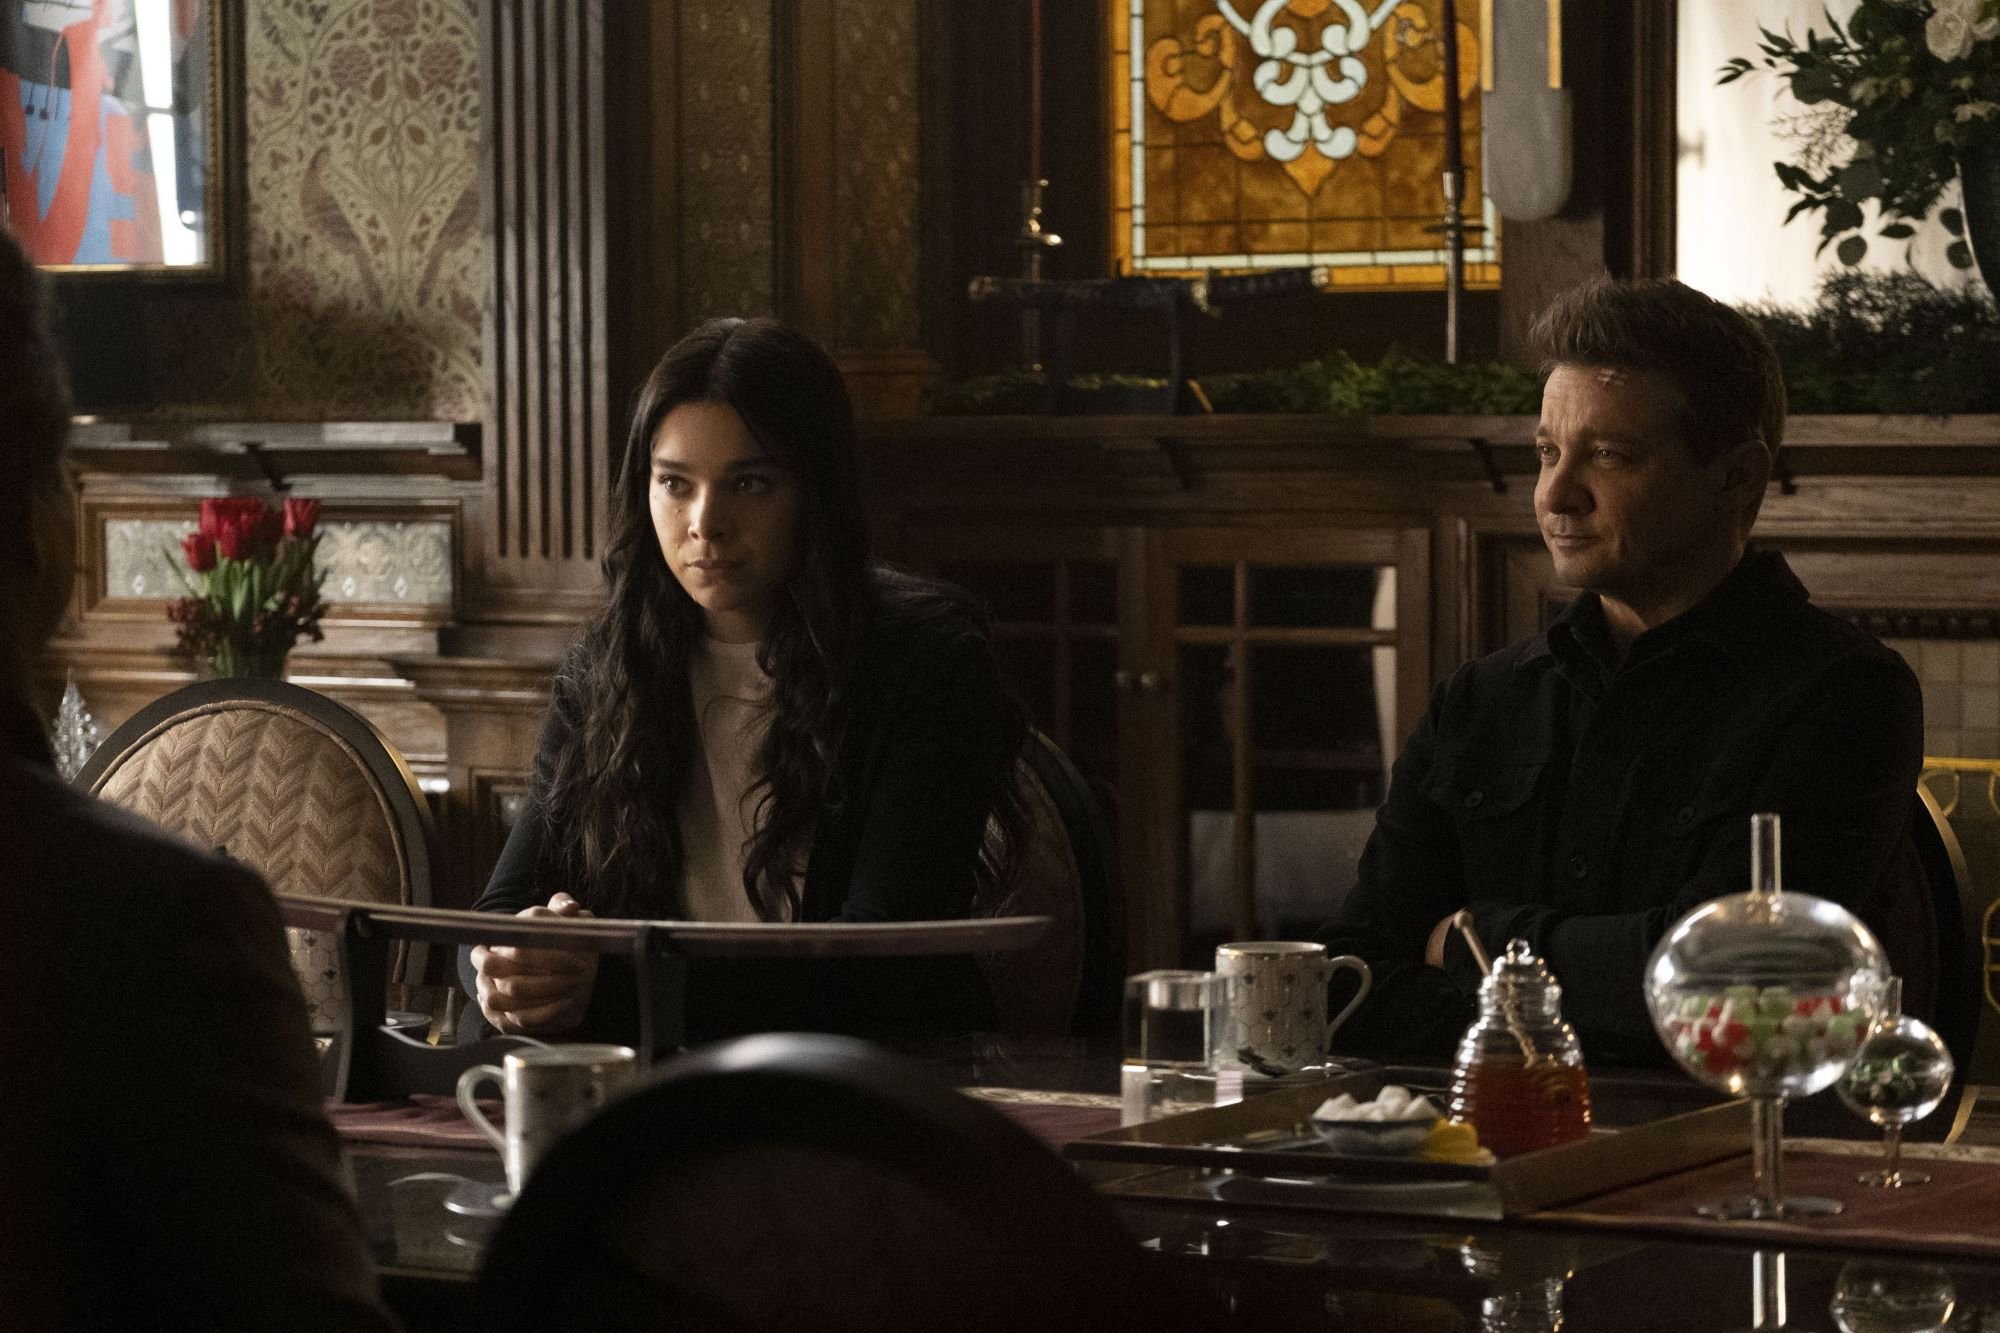 'Hawkeye' Episode 5 stars Hailee Steinfeld and Jeremy Renner, in character as Kate Bishop and Clint Barton, sit at a table. Kate wears a black jacket over a white shirt. Clint wears a black button-up jacket.